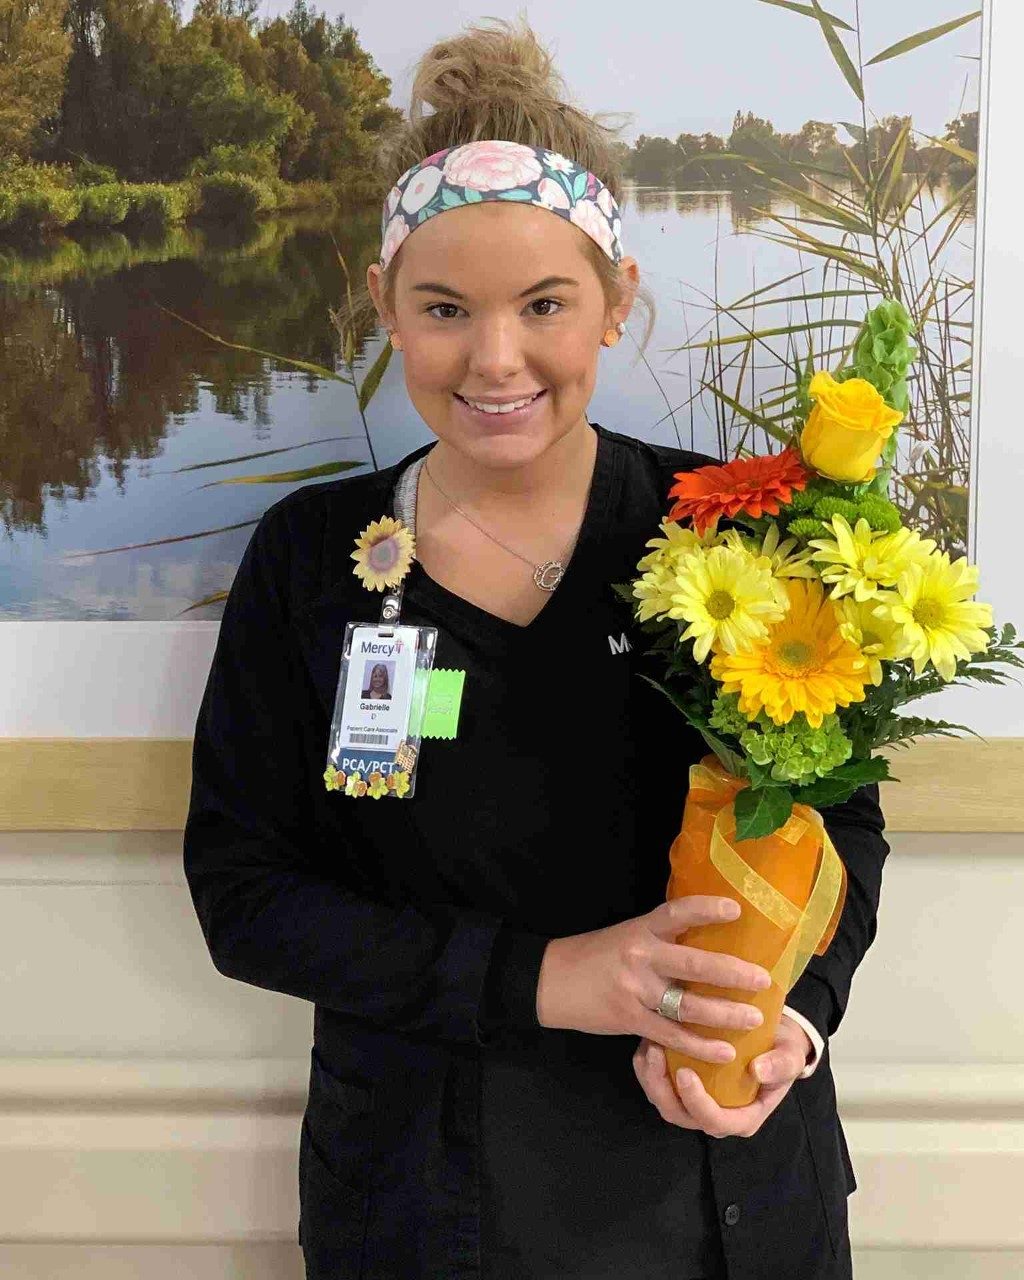 Gabby Davidson, patient care associate, earned the latest Daffodil Award for the outstanding, compassionate care at Mercy Hospital South.